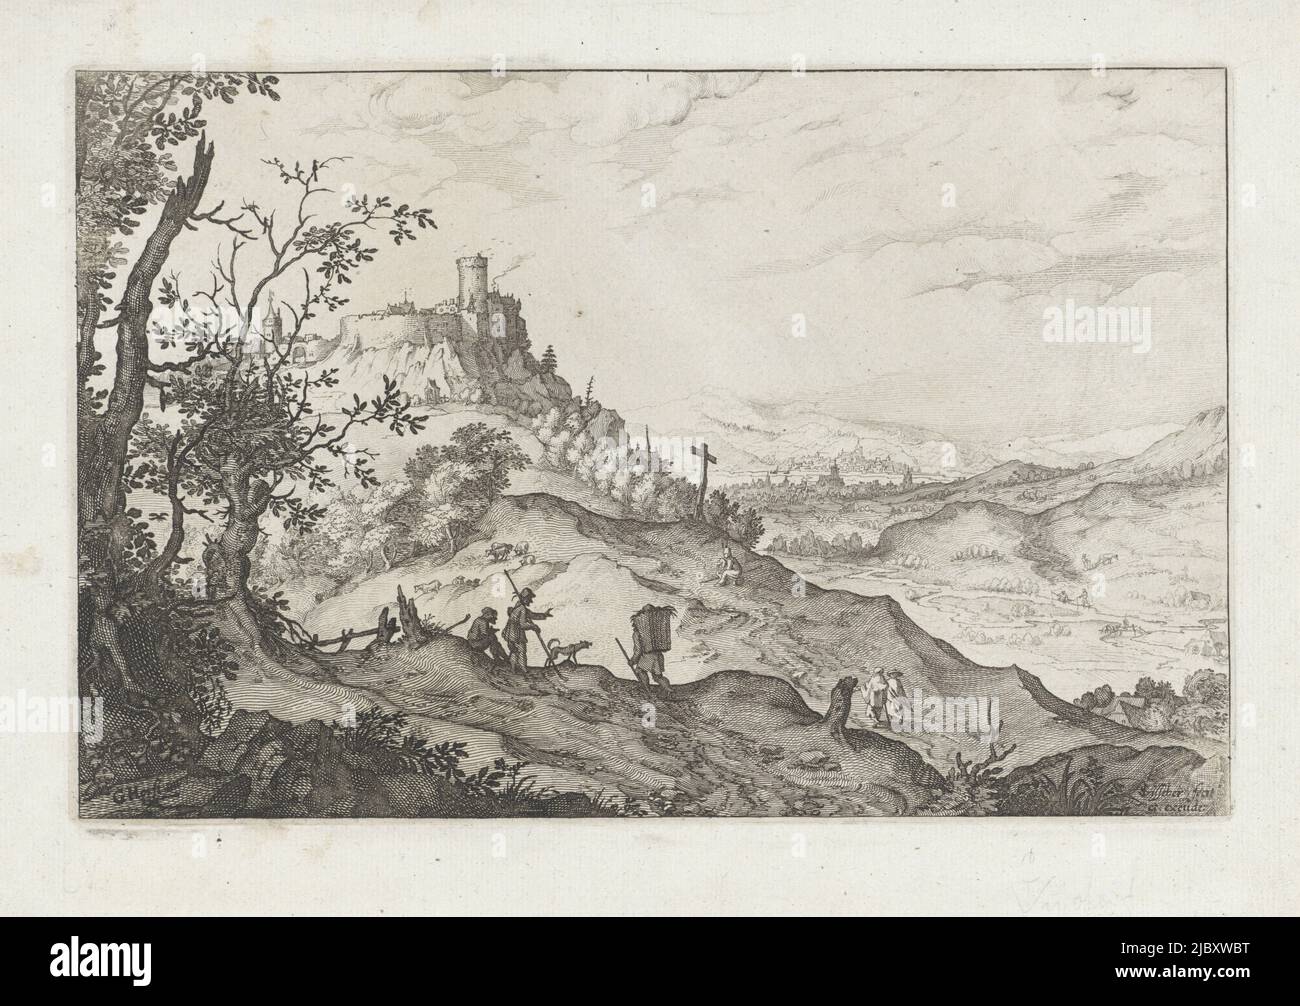 Mountain landscape with hikers and shepherds. On the left on a hill a walled city with a castle. Through the valley flows a river in which two fishermen have cast their rods, Mountain landscape with hikers and shepherds Landscape with the fall of Icarus, print maker: Claes Jansz. Visscher (II), (mentioned on object), Gerard van der Horst, (mentioned on object), publisher: Claes Jansz. Visscher (II), (mentioned on object), Amsterdam, 1610 - 1652, paper, etching, engraving, h 192 mm × w 293 mm Stock Photo